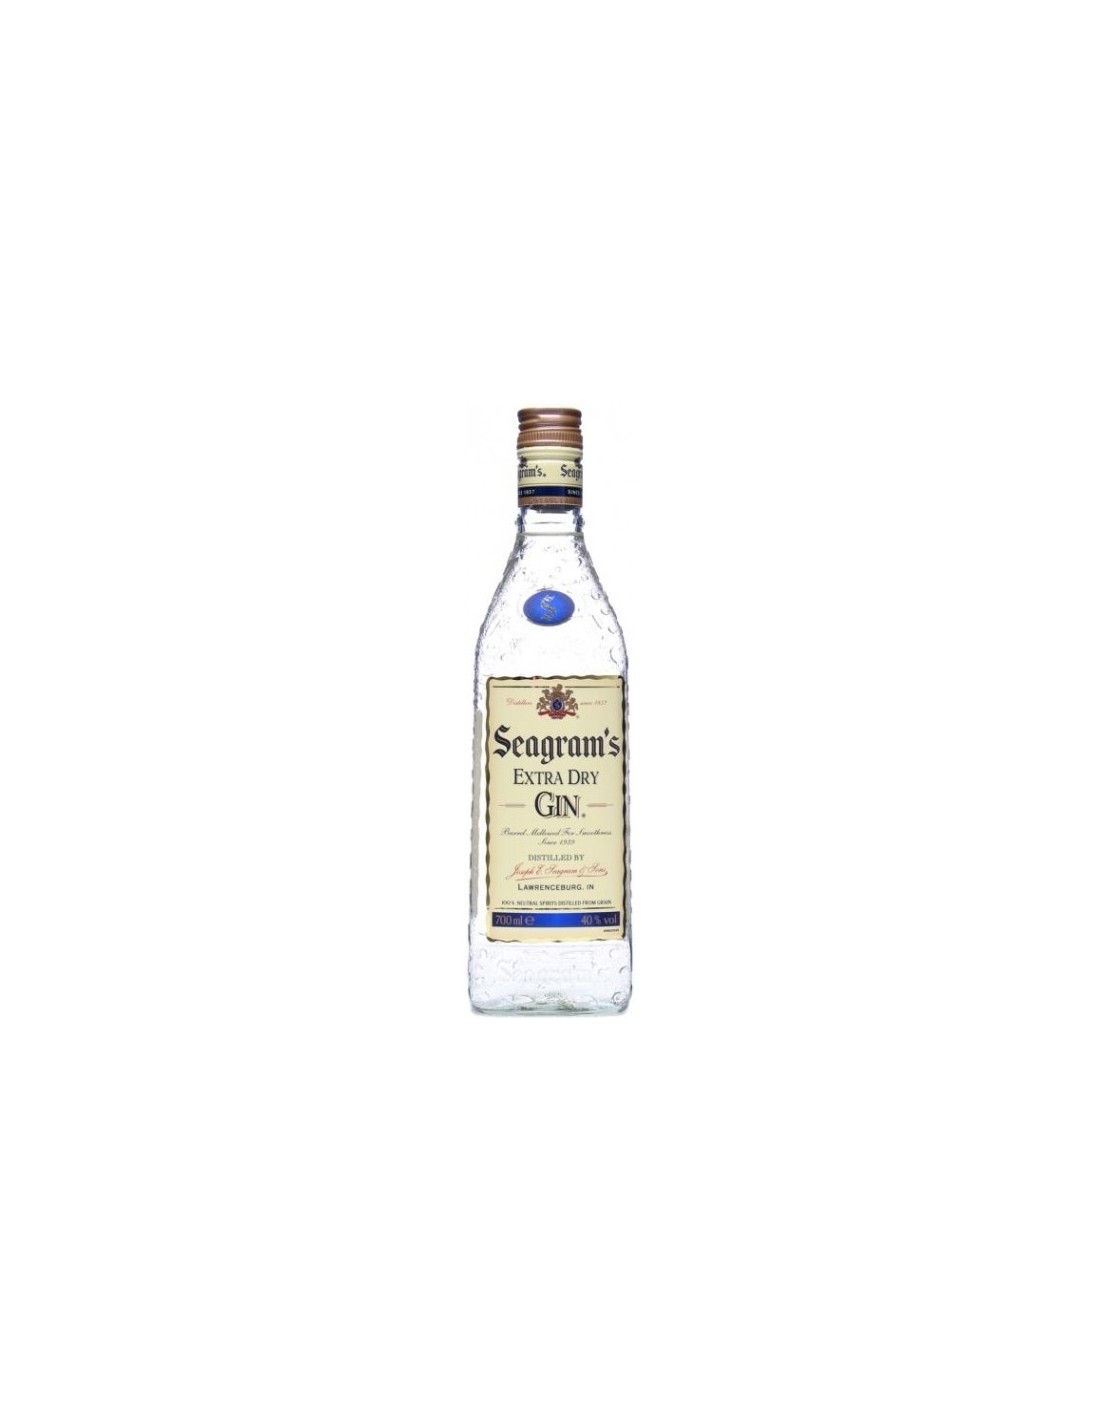 Gin Seagram’s Extra Dry, 40% alc., 0.7L alcooldiscount.ro